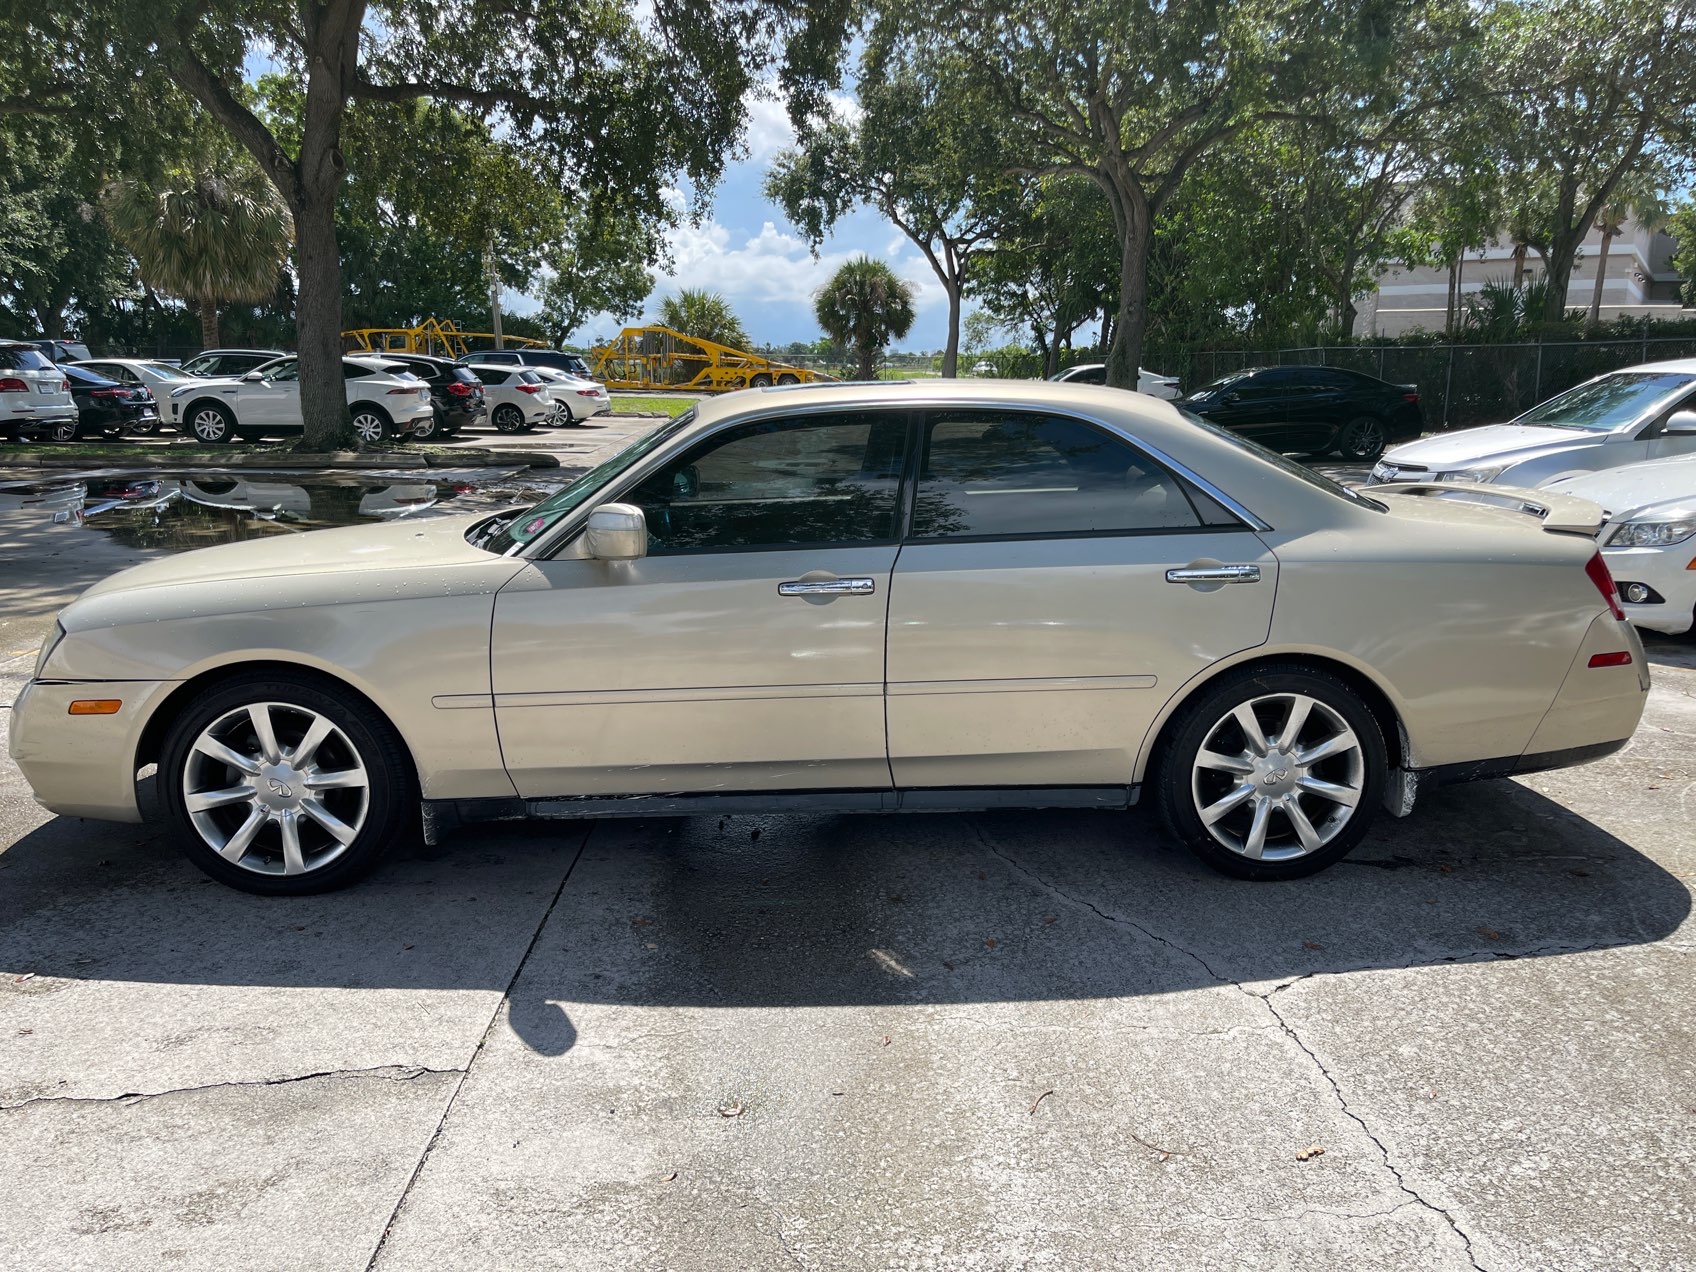 Used 2003 INFINITI M45 for sale in WEST PALM | 123102